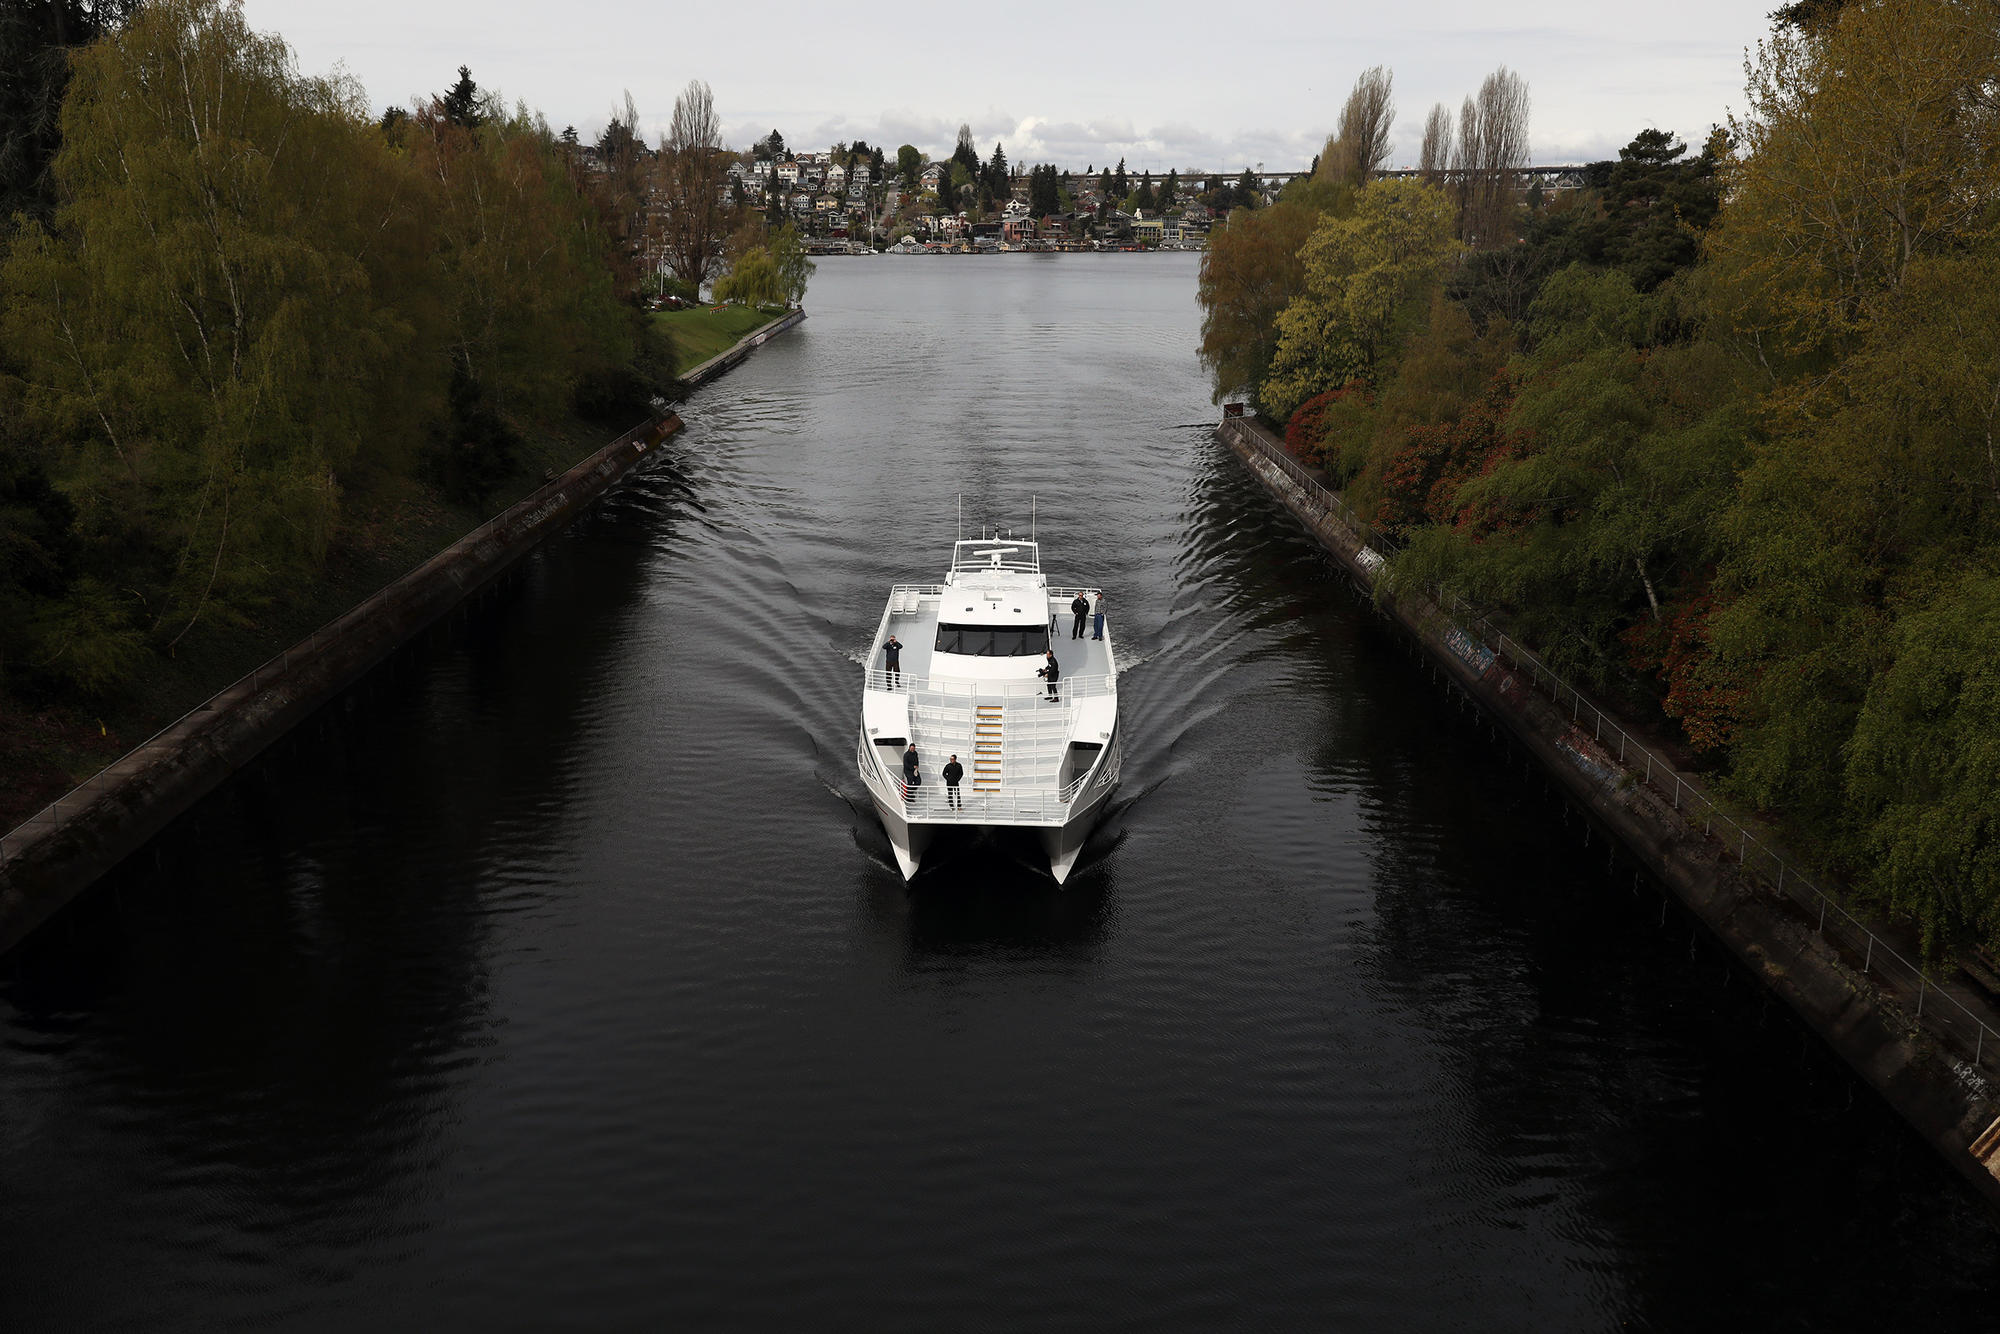 The Saratoga is seen passing through the Montlake Cut from the Montlake Bridge during a water taxi test ride from Lake Union Park at South Lake Union in Seattle to Southport on Lake Washington in Renton, during the morning of April 18. 